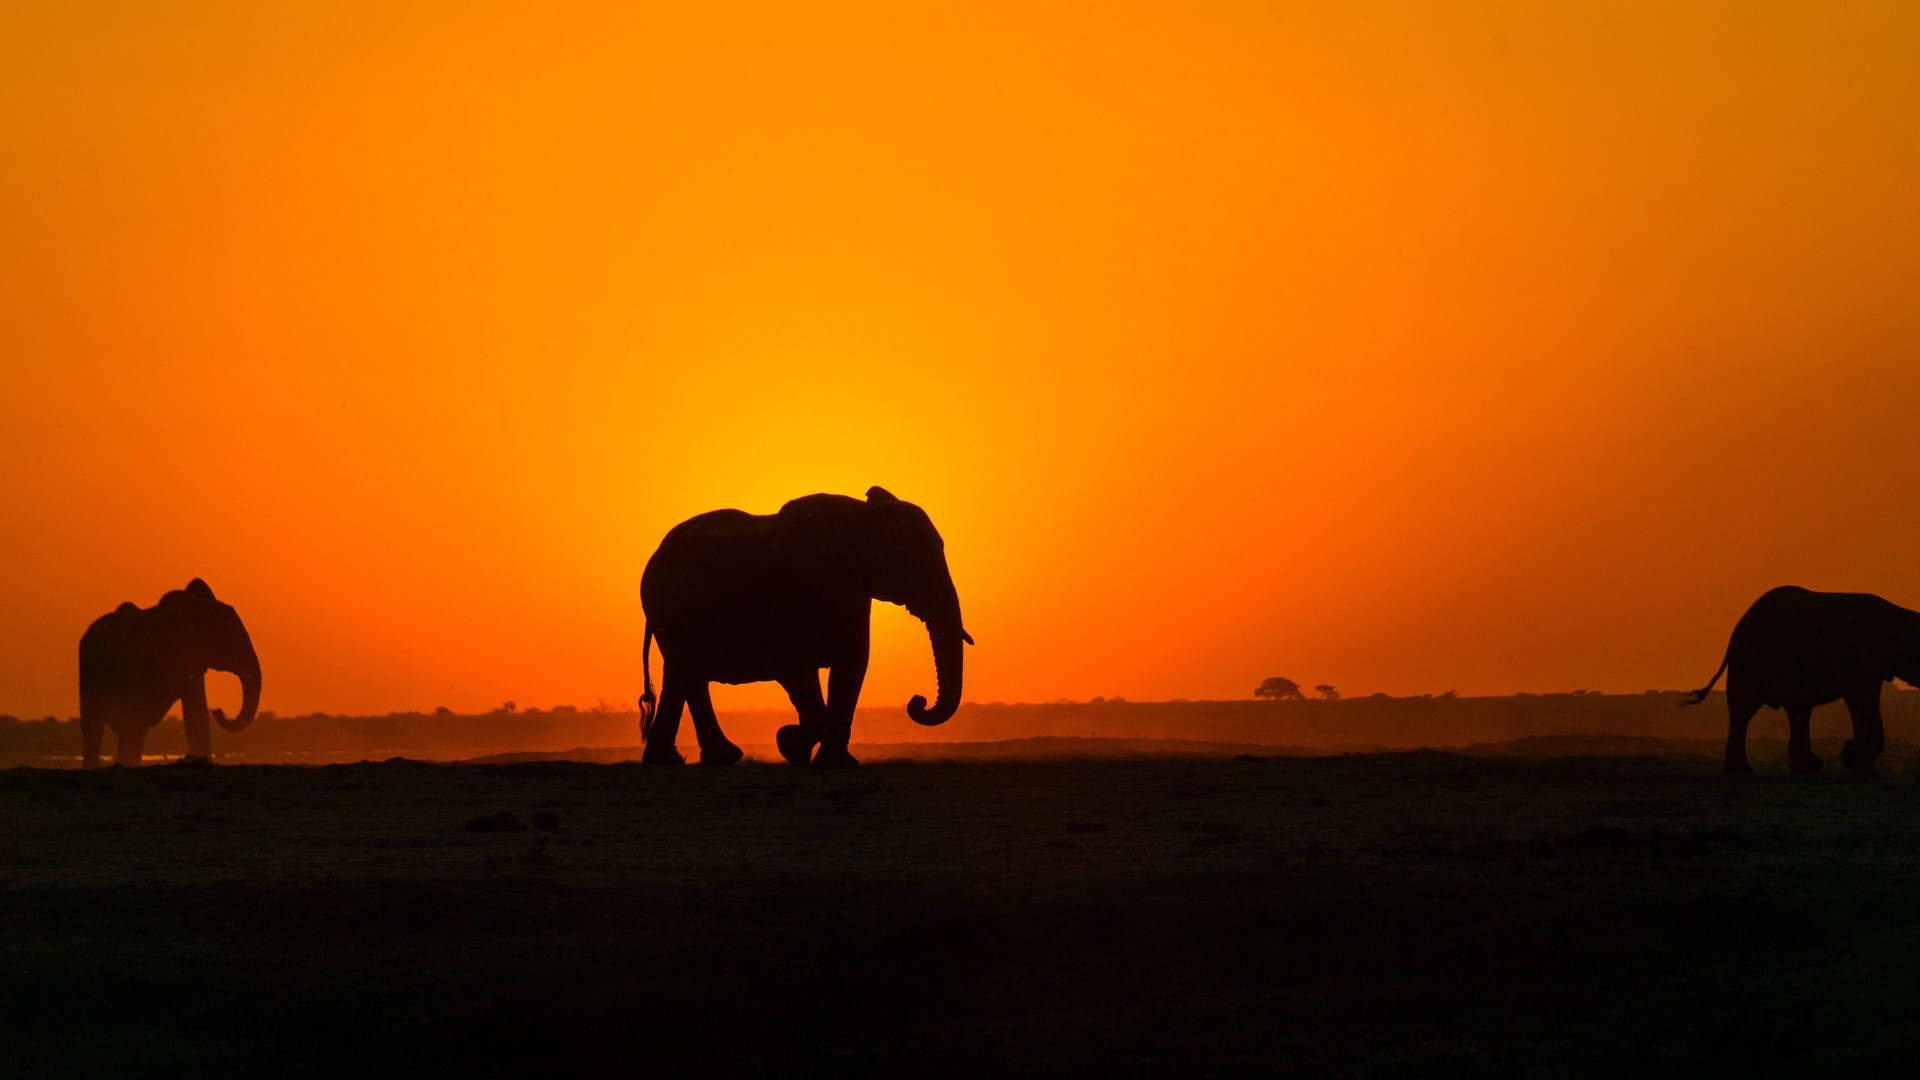 Silhouette Of Elephants Africa 4k Background